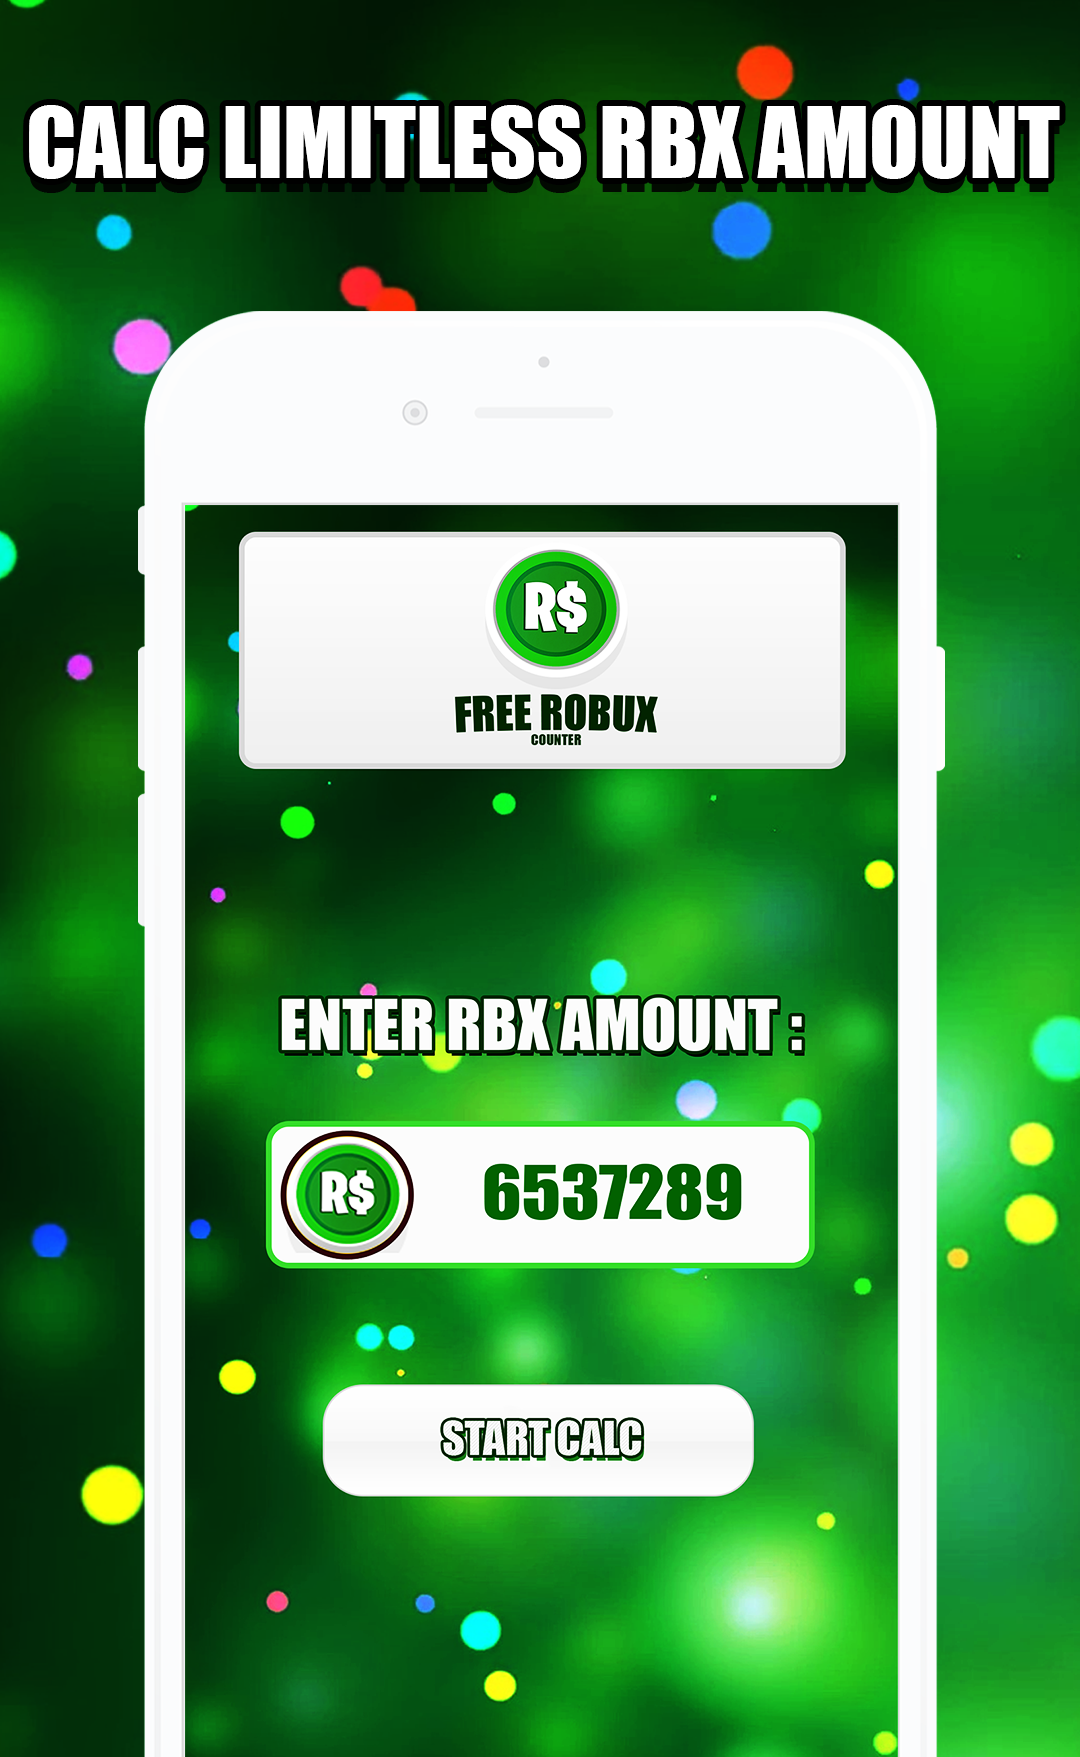 Free Robux Calc For Roblox’s - RBX 2020 screenshot game